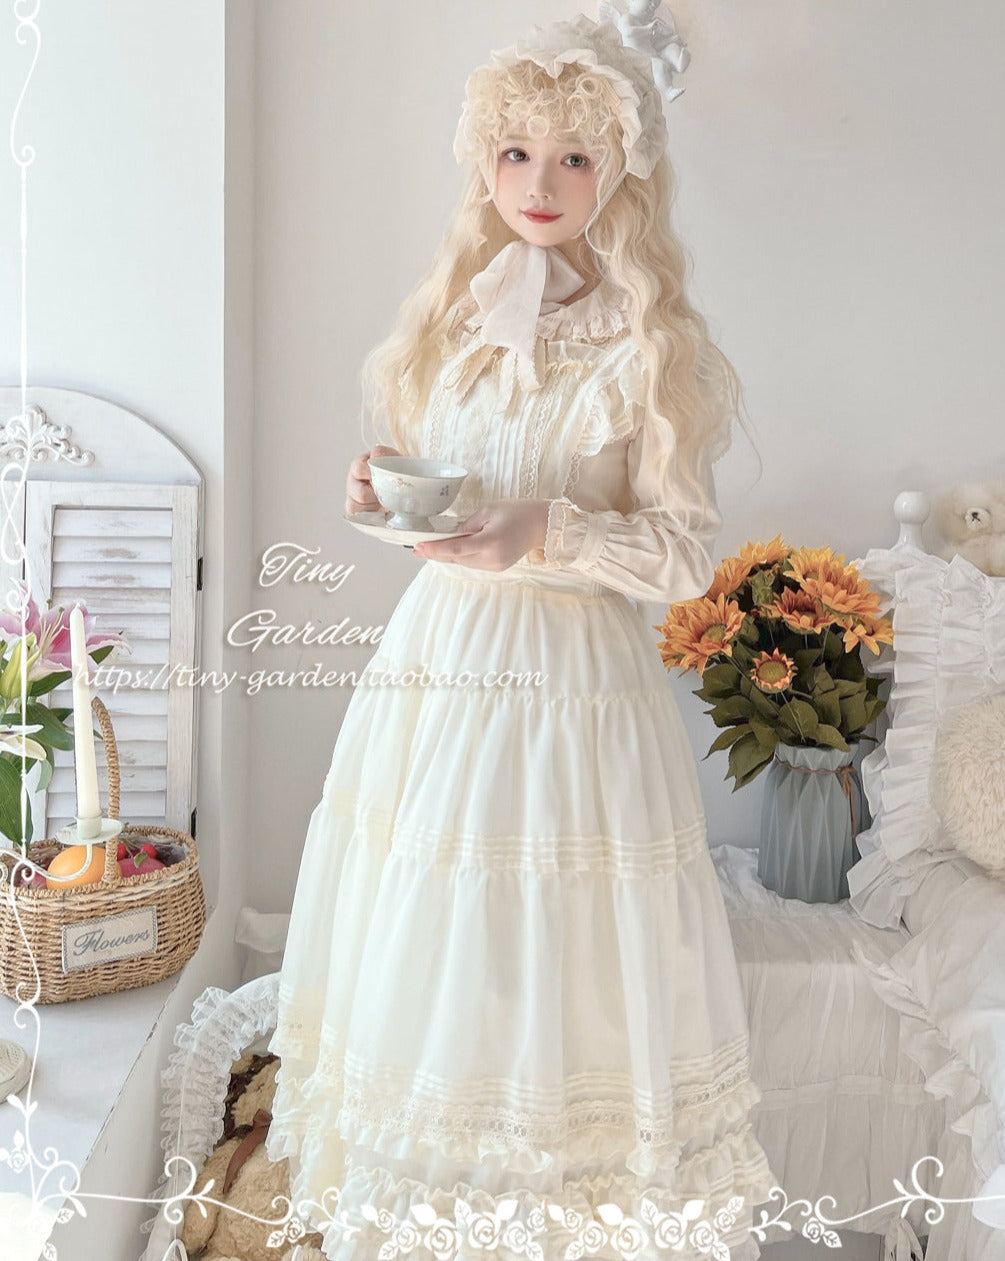 [Outlet] French girly 2way apron skirt [with flared sleeves]